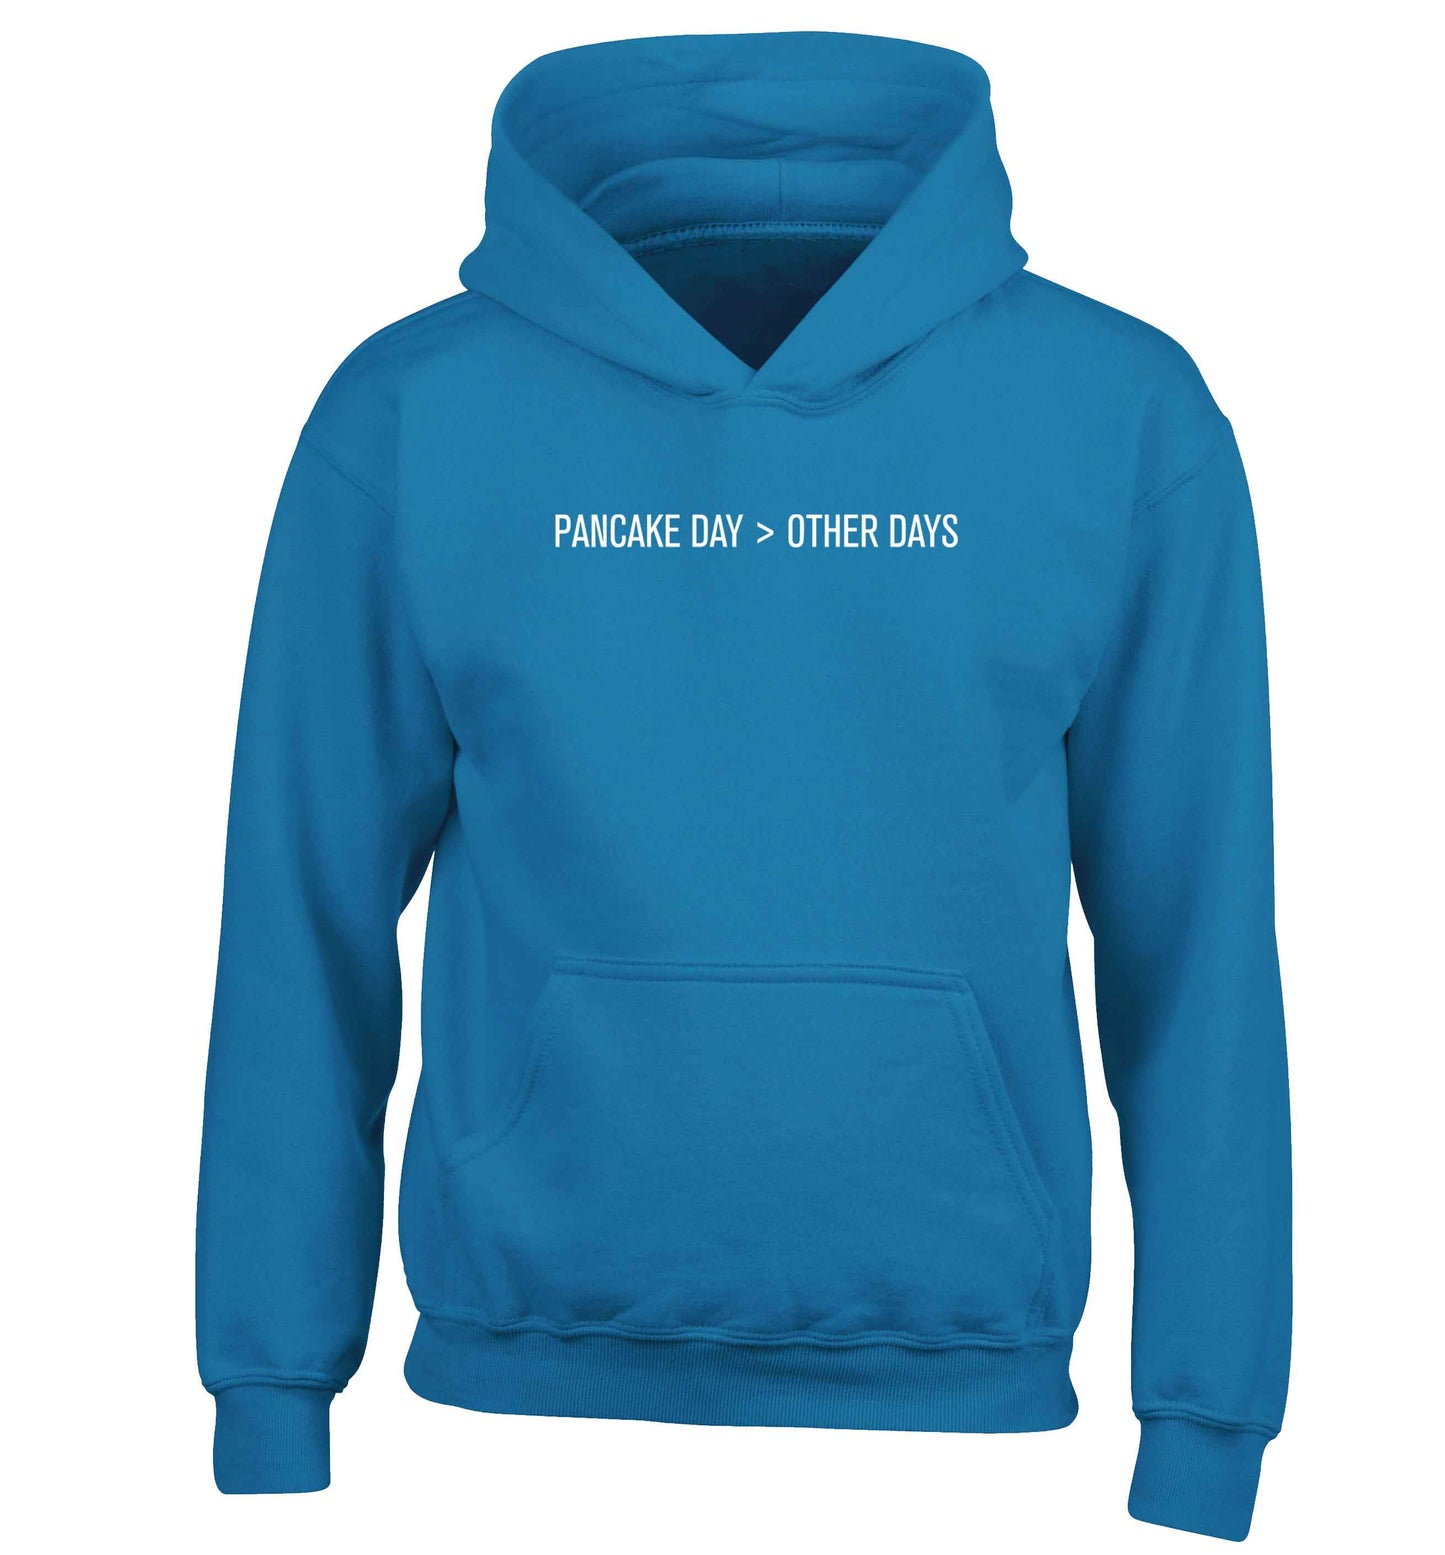 Pancake day > other days children's blue hoodie 12-13 Years